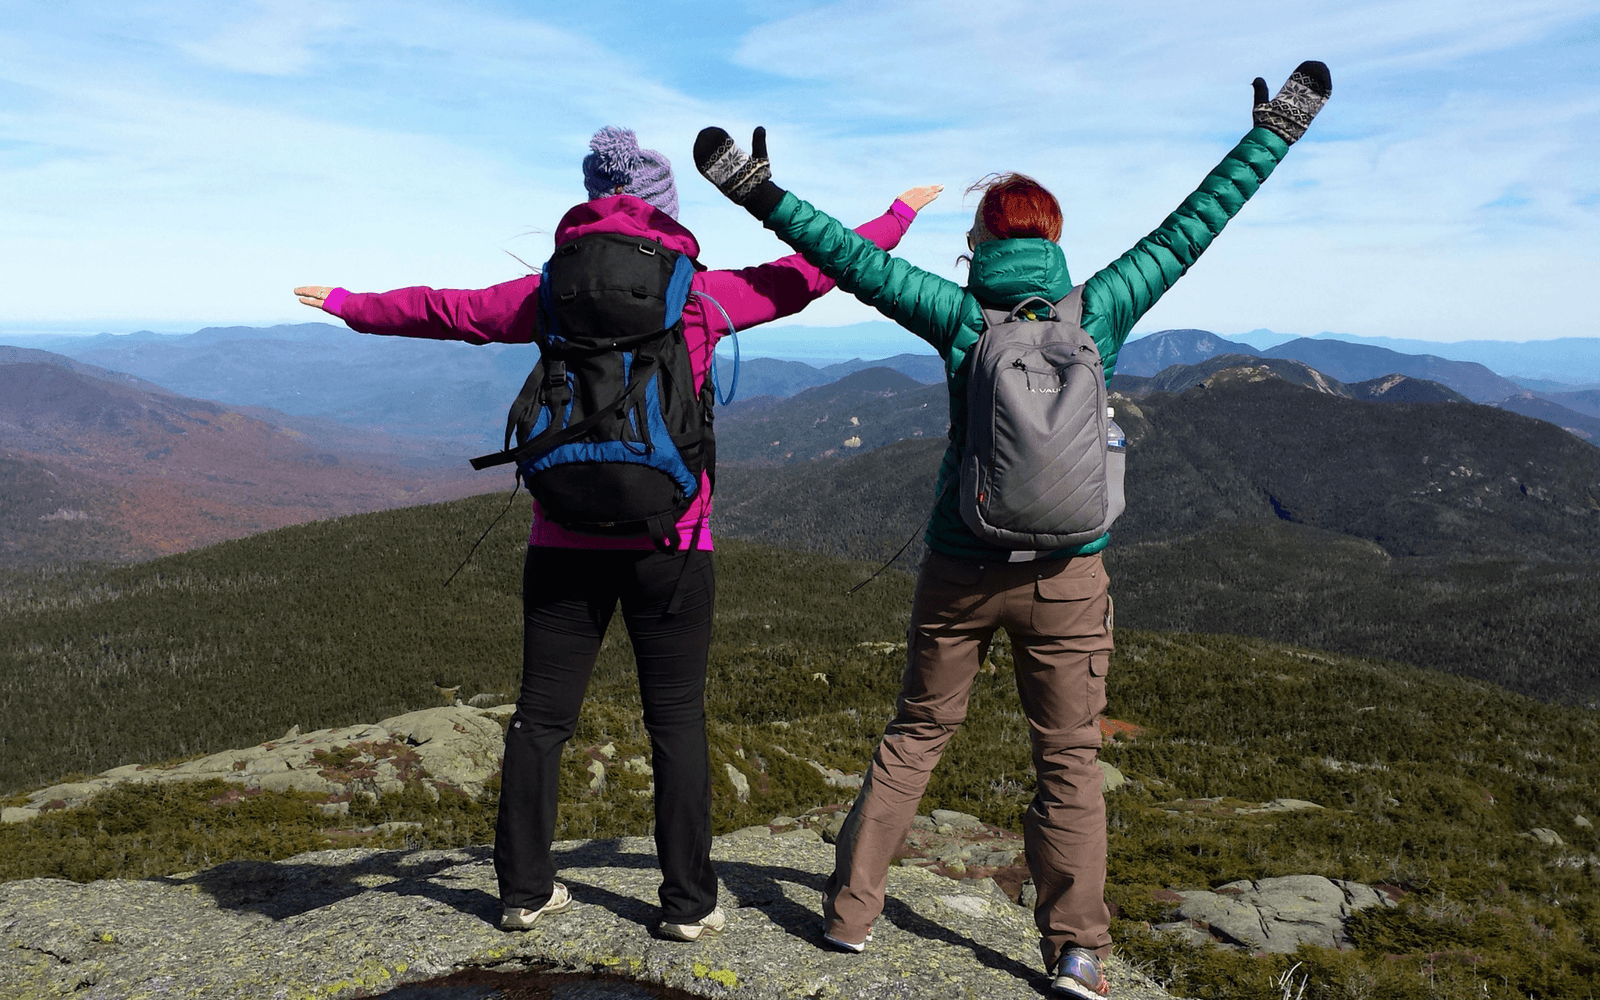 A woman's place is on the trail - Adirondack Explorer